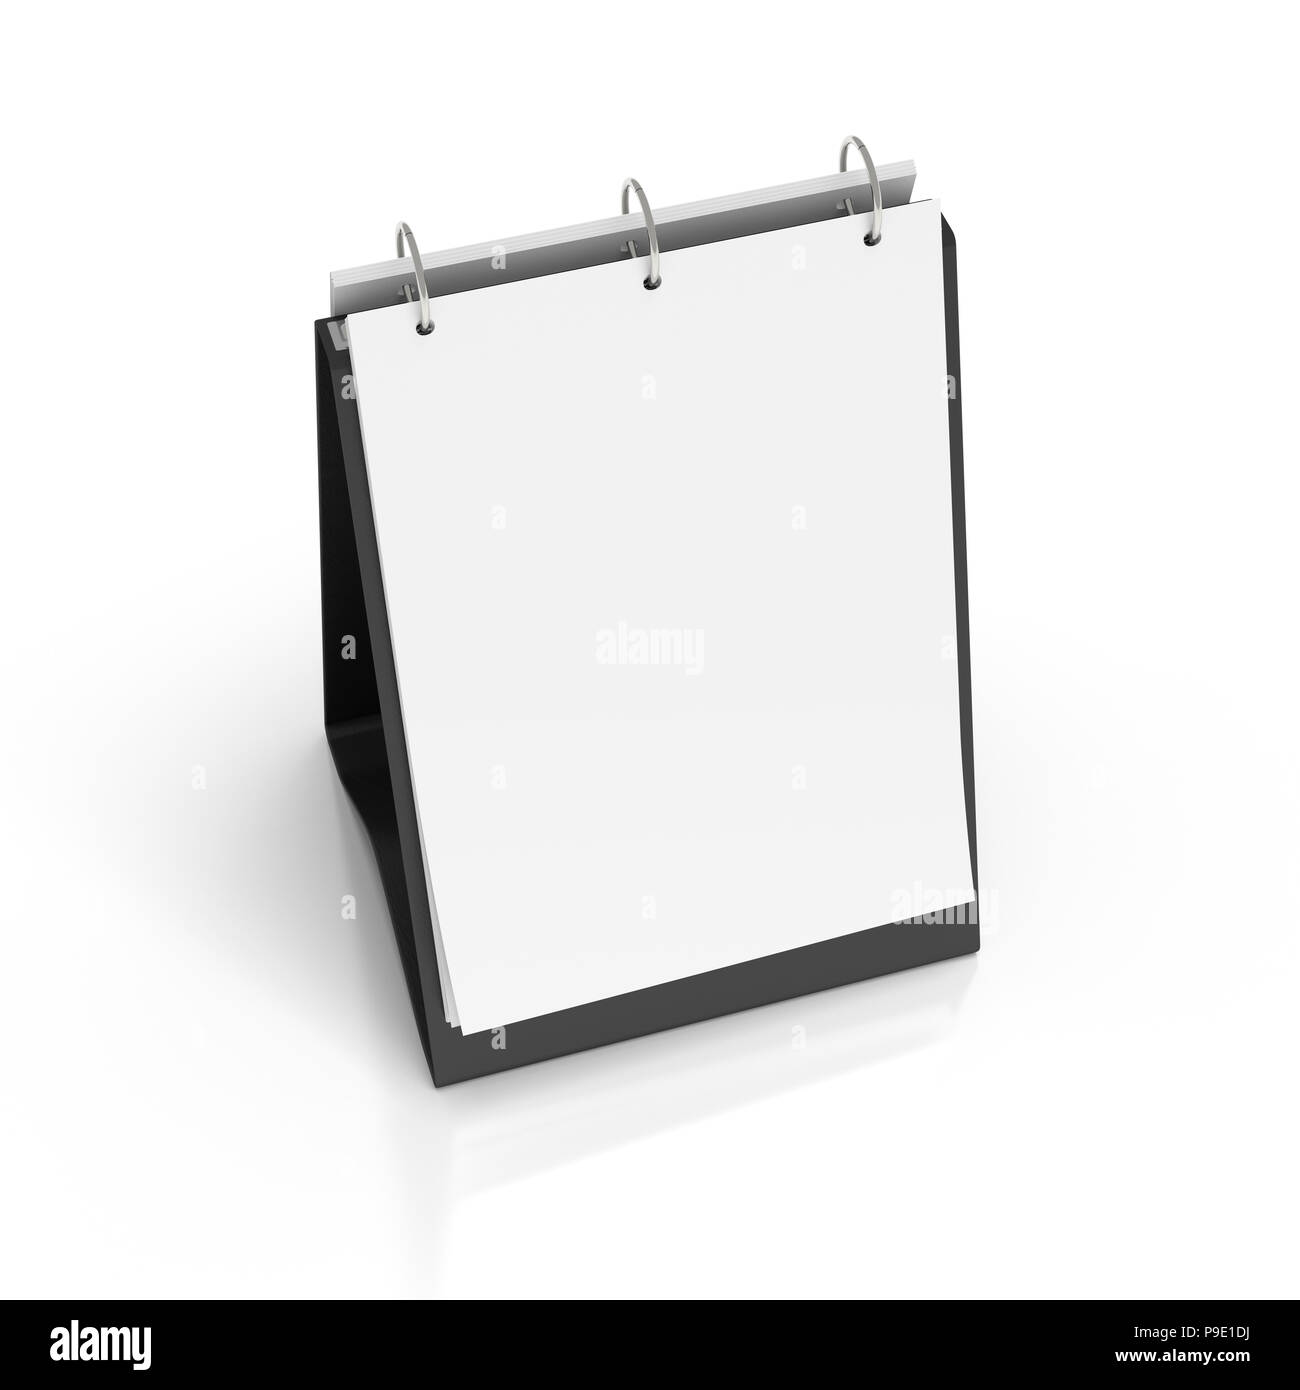 Tabletop Flip Chart Stand